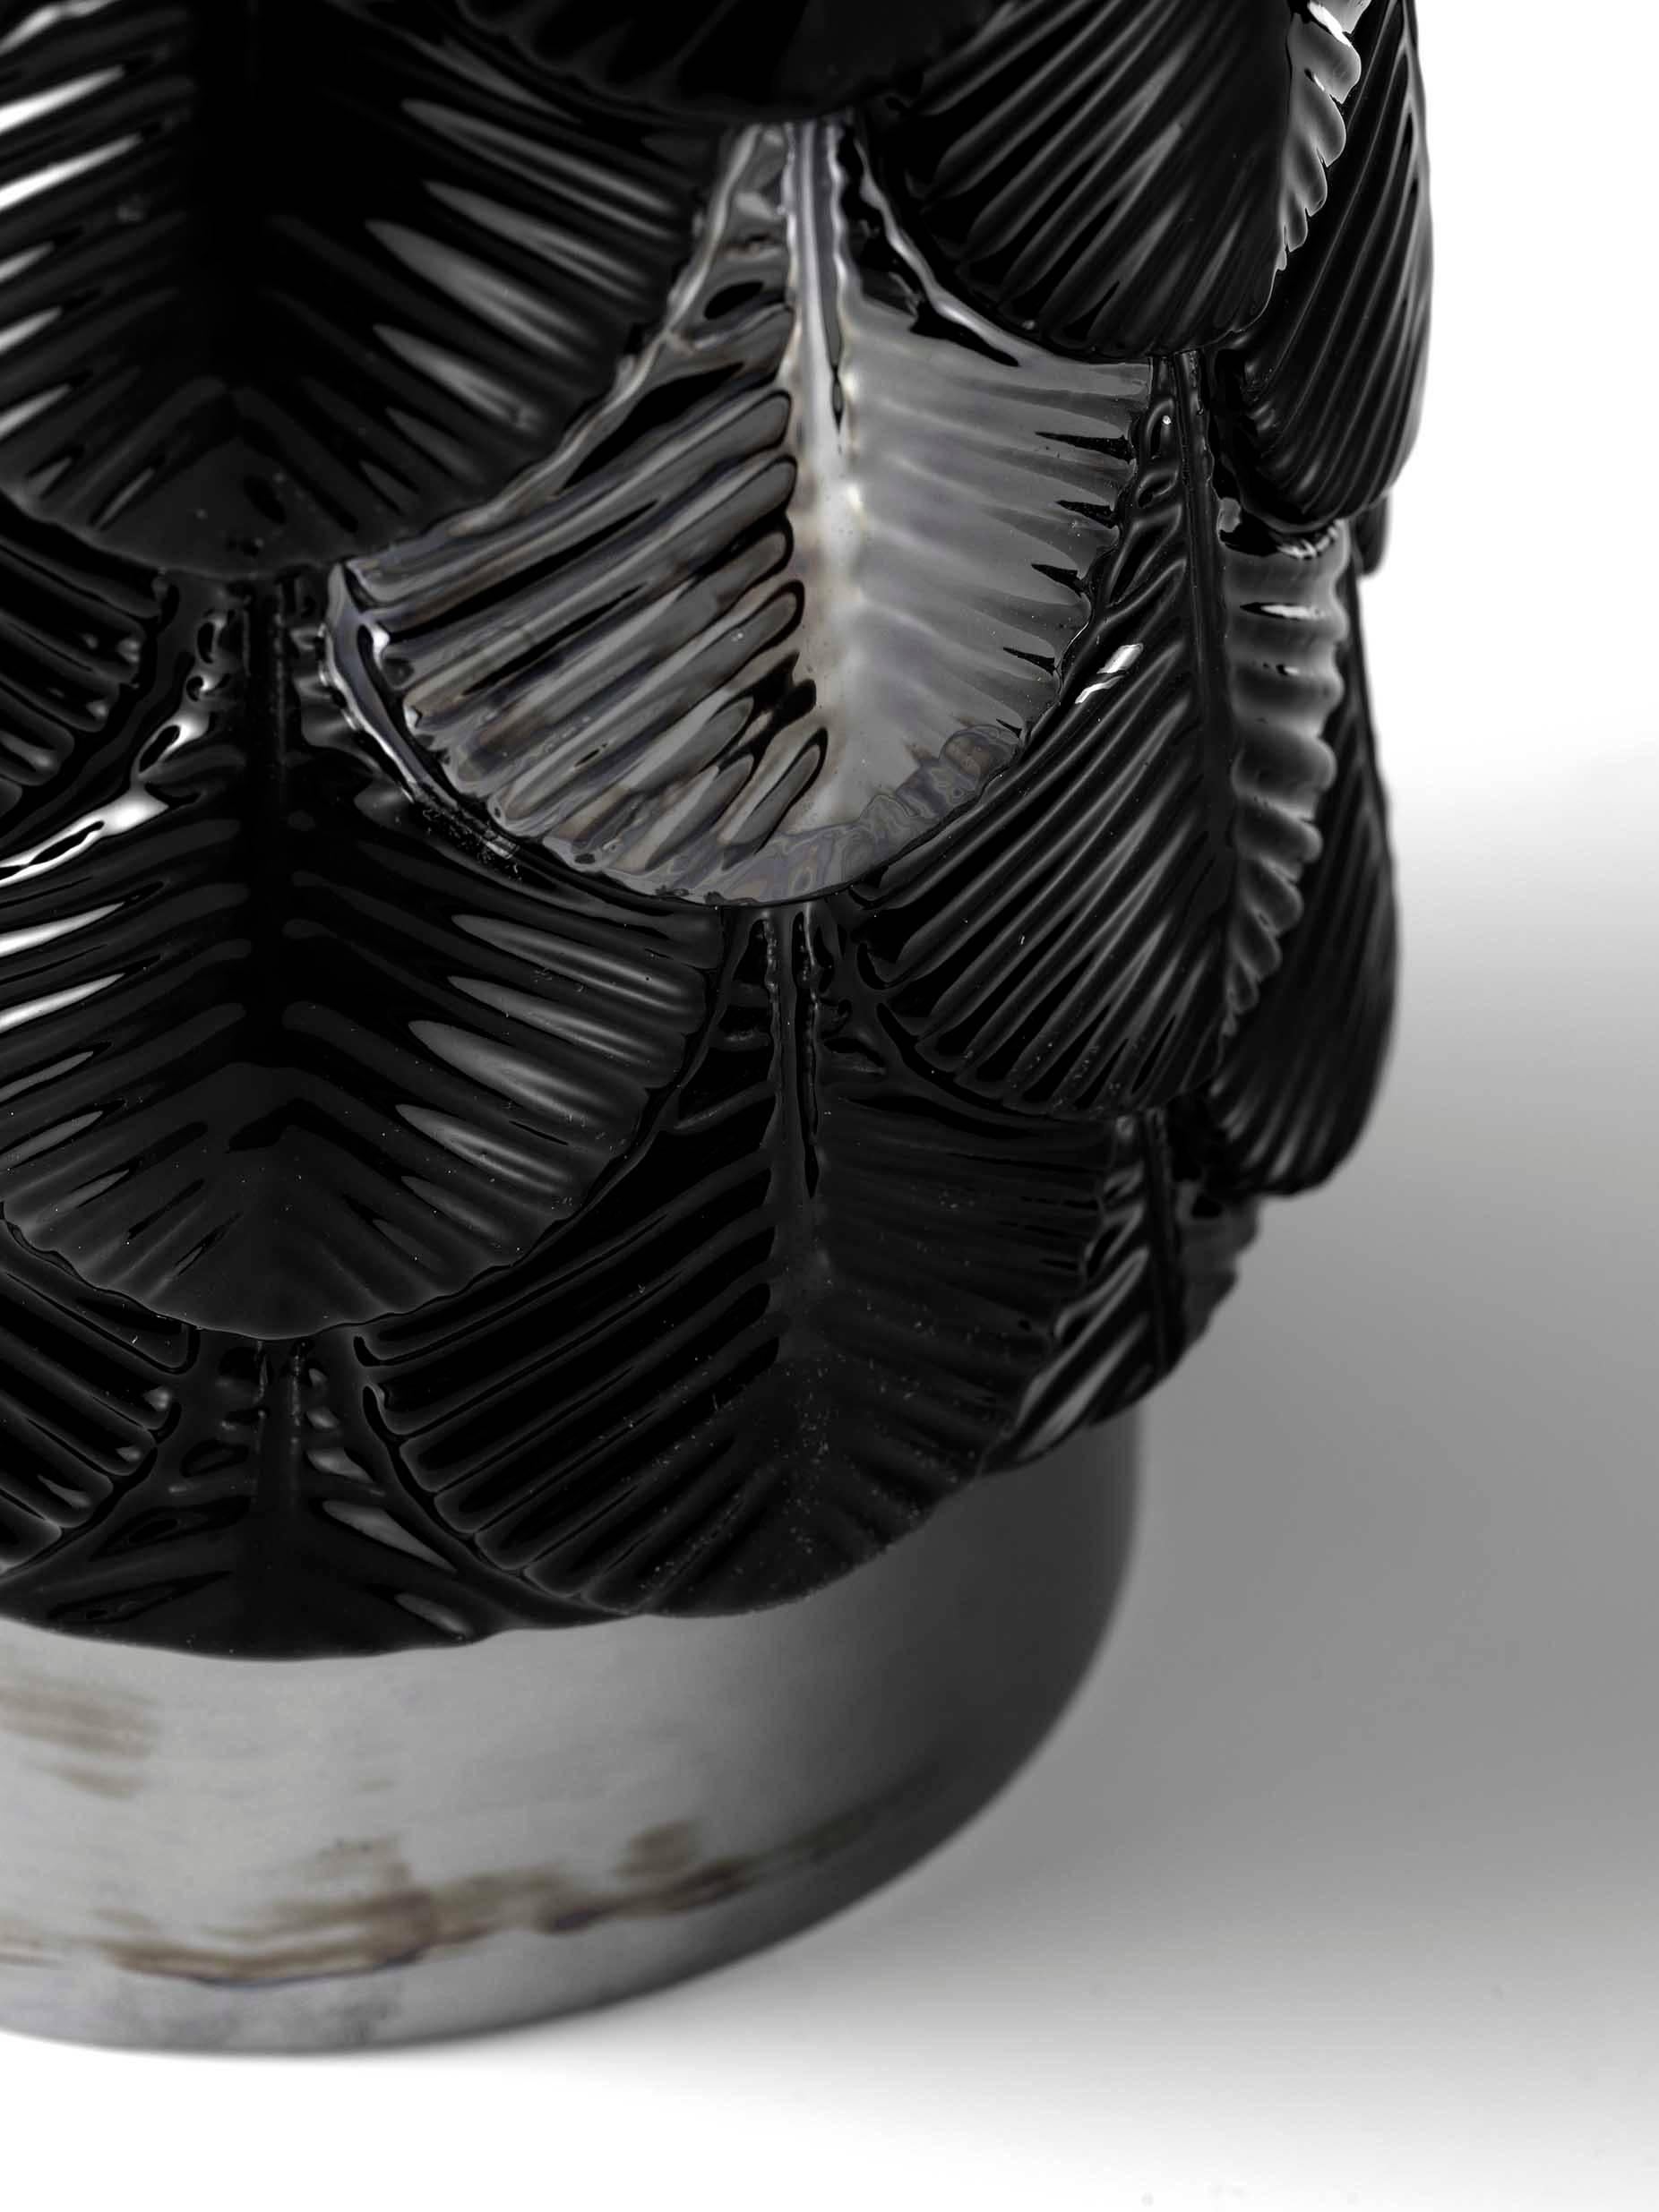 Plumage vase designed by Cristina Celestino for Botteganove is a ceramic vase produced with artisanal methods in Italy and hand-painted with black gloss enamel with some feather and plinth decorated with luster finish.
The interior of the piece is